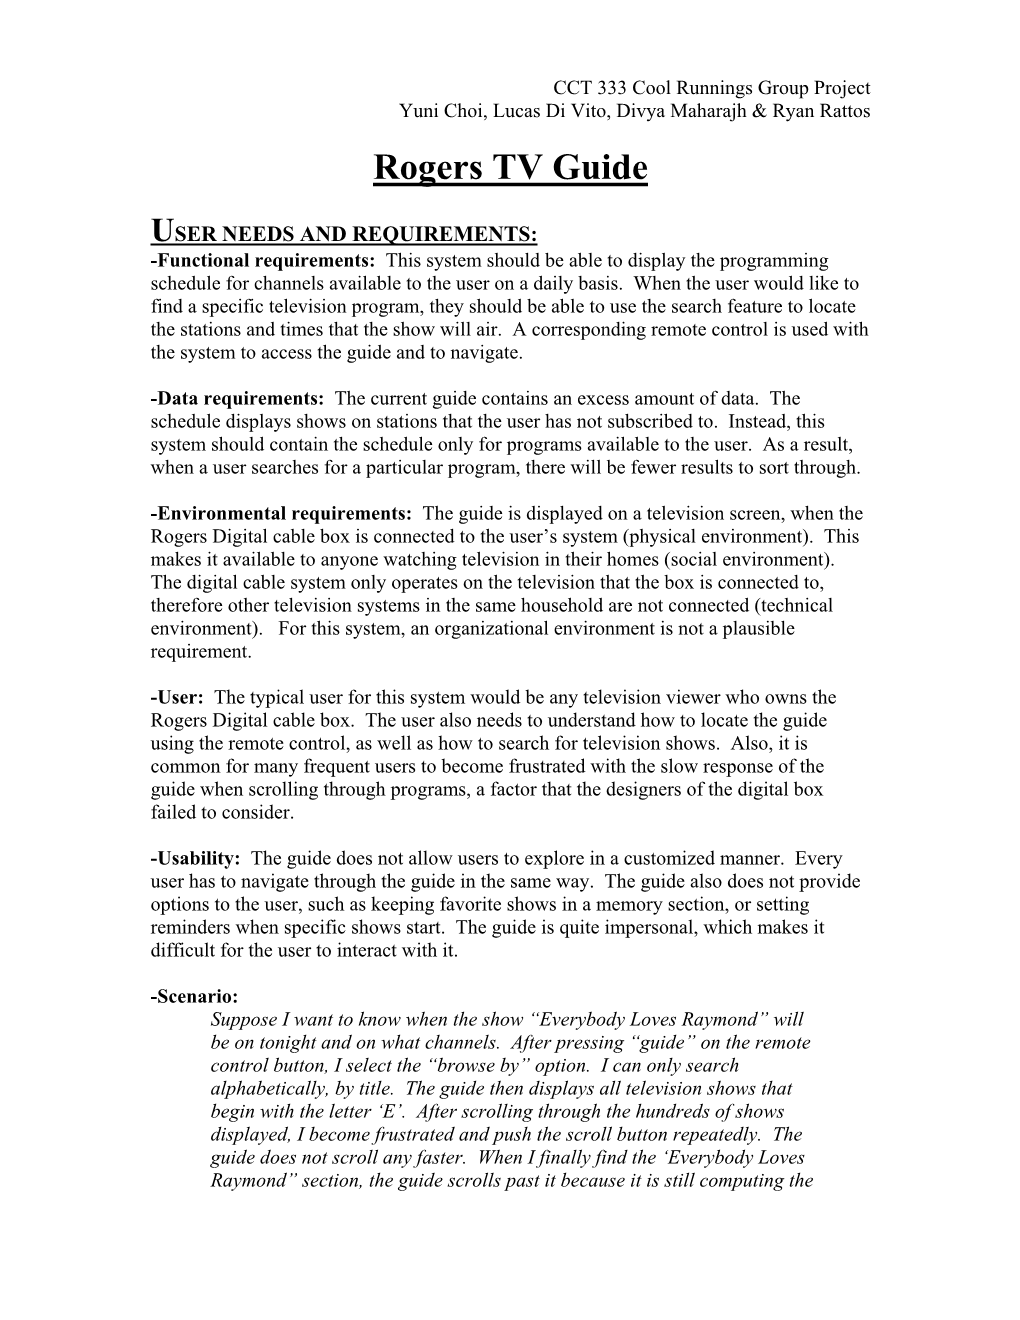 Rogers TV Guide